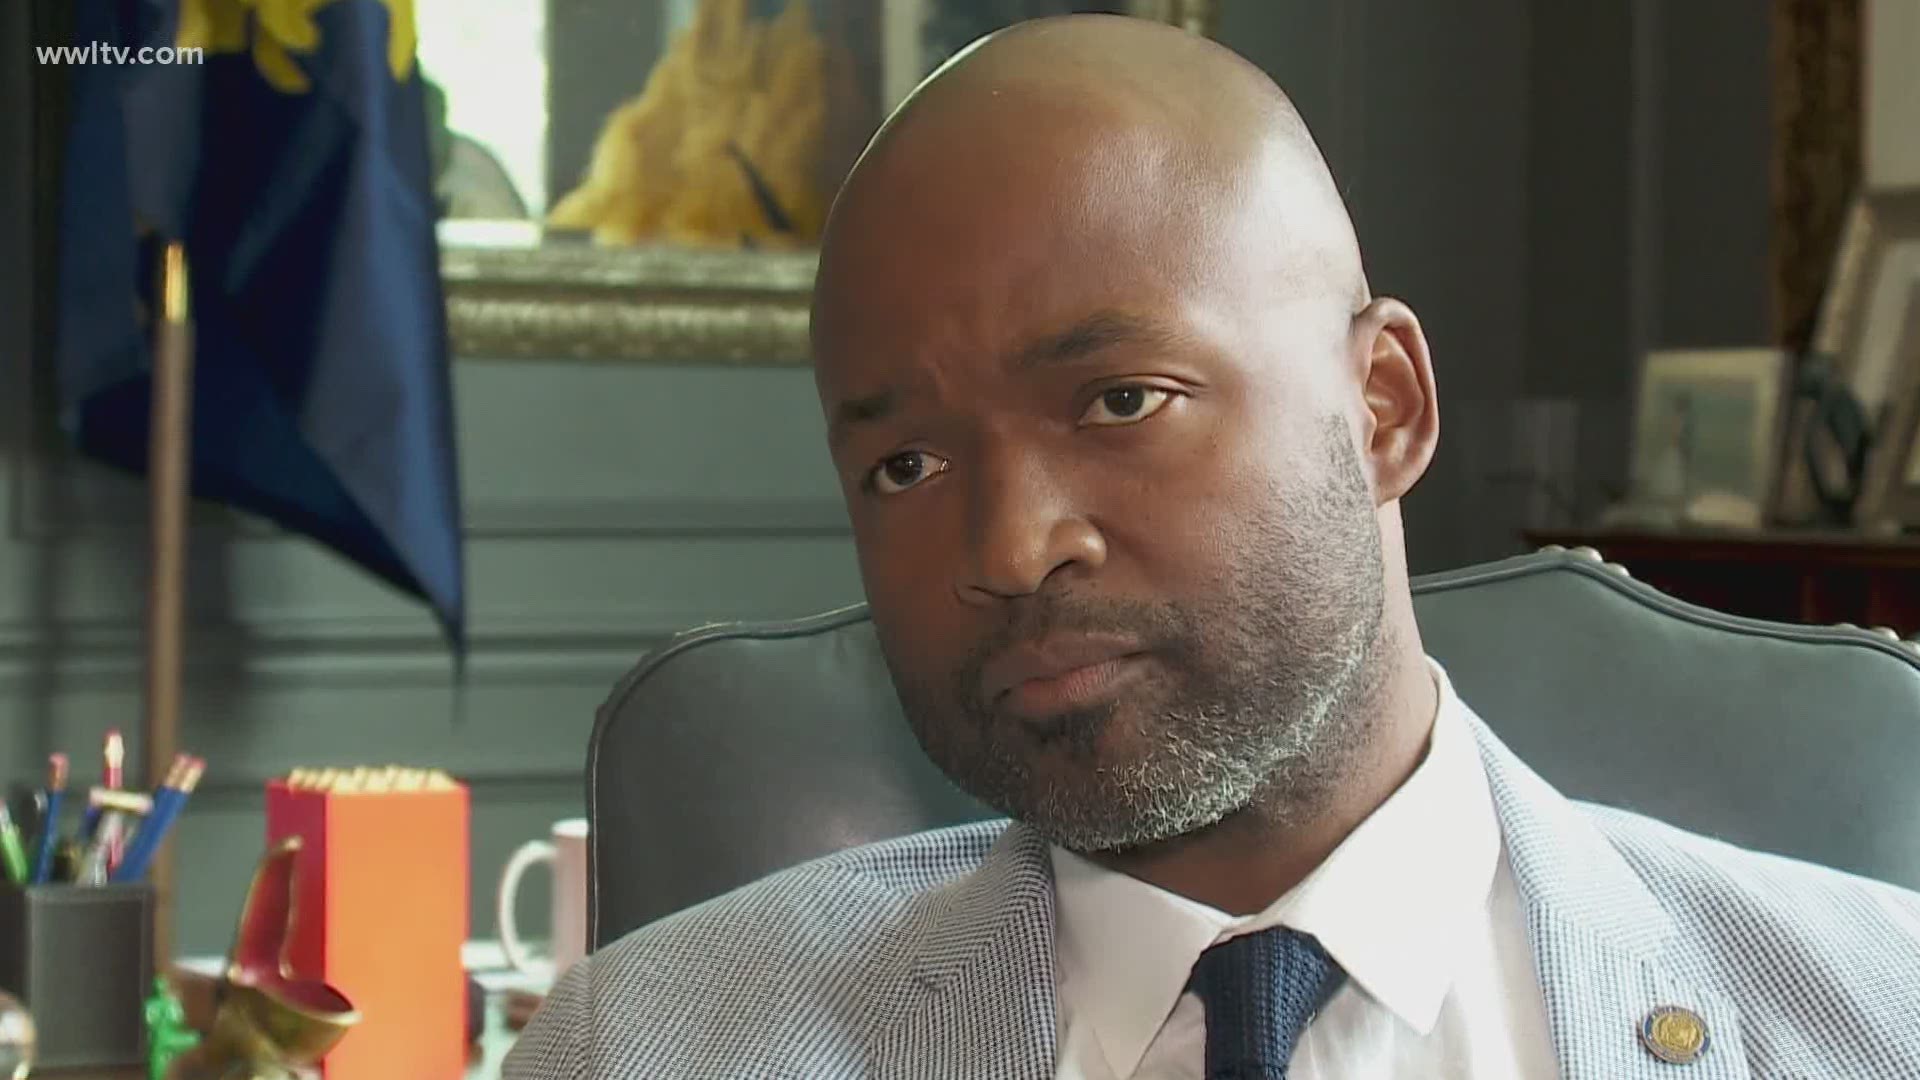 Williams, who is a city councilman-at-large for New Orleans, has denied wrongdoing ahead of the indictment and blamed his tax preparer for the issues.